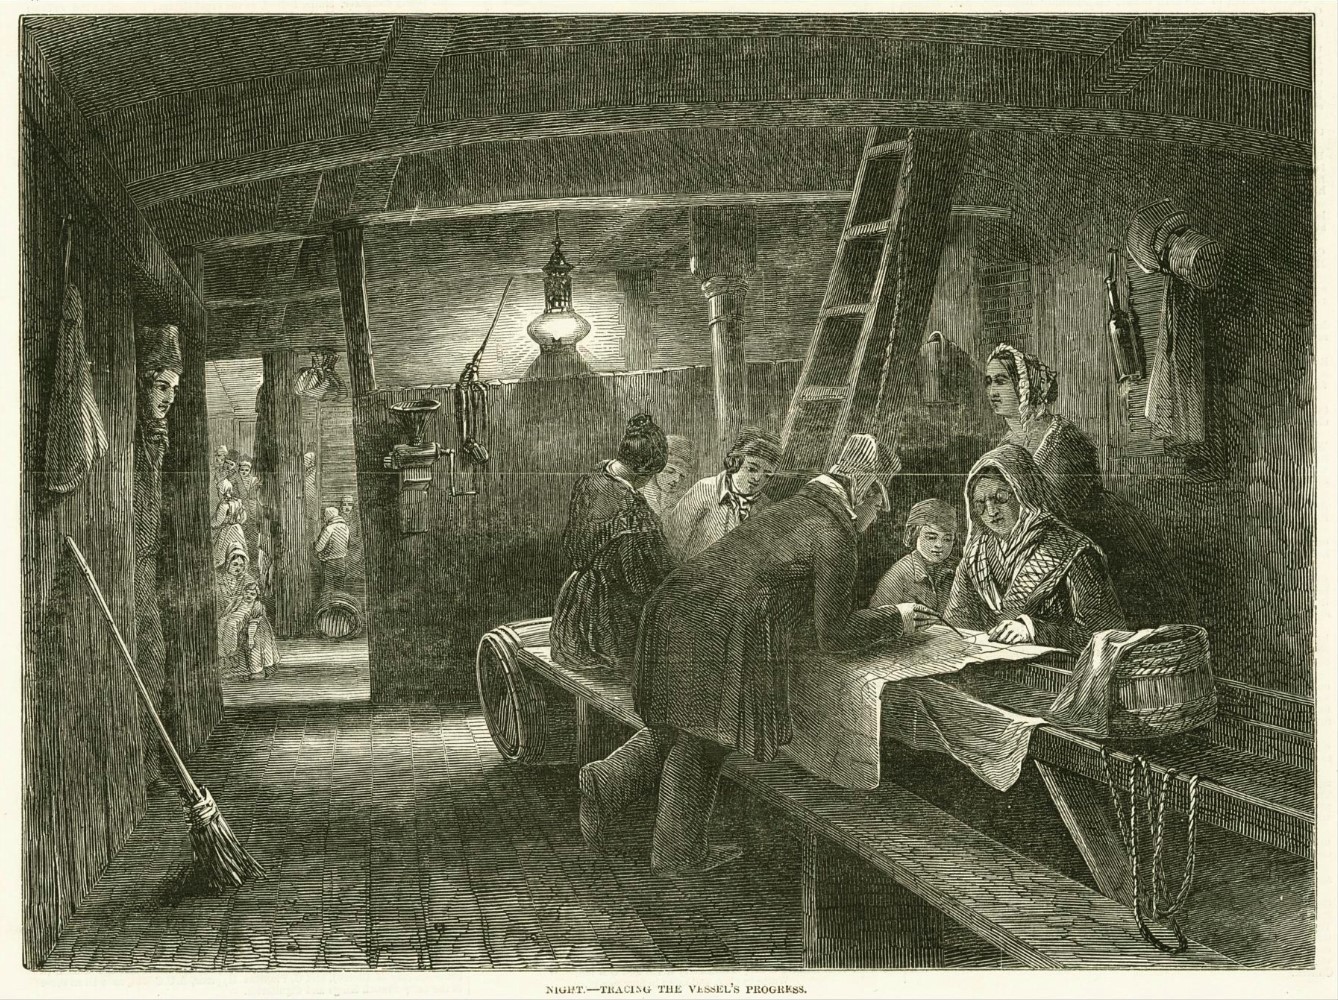 Passengers become amateur navigators as they trace their vessel’s progress on a long 19th century sea voyage. From ‘Scenes on board an Australian emigrant ship’, The Illustrated London News, 1848.  ANMM Collection 00003594